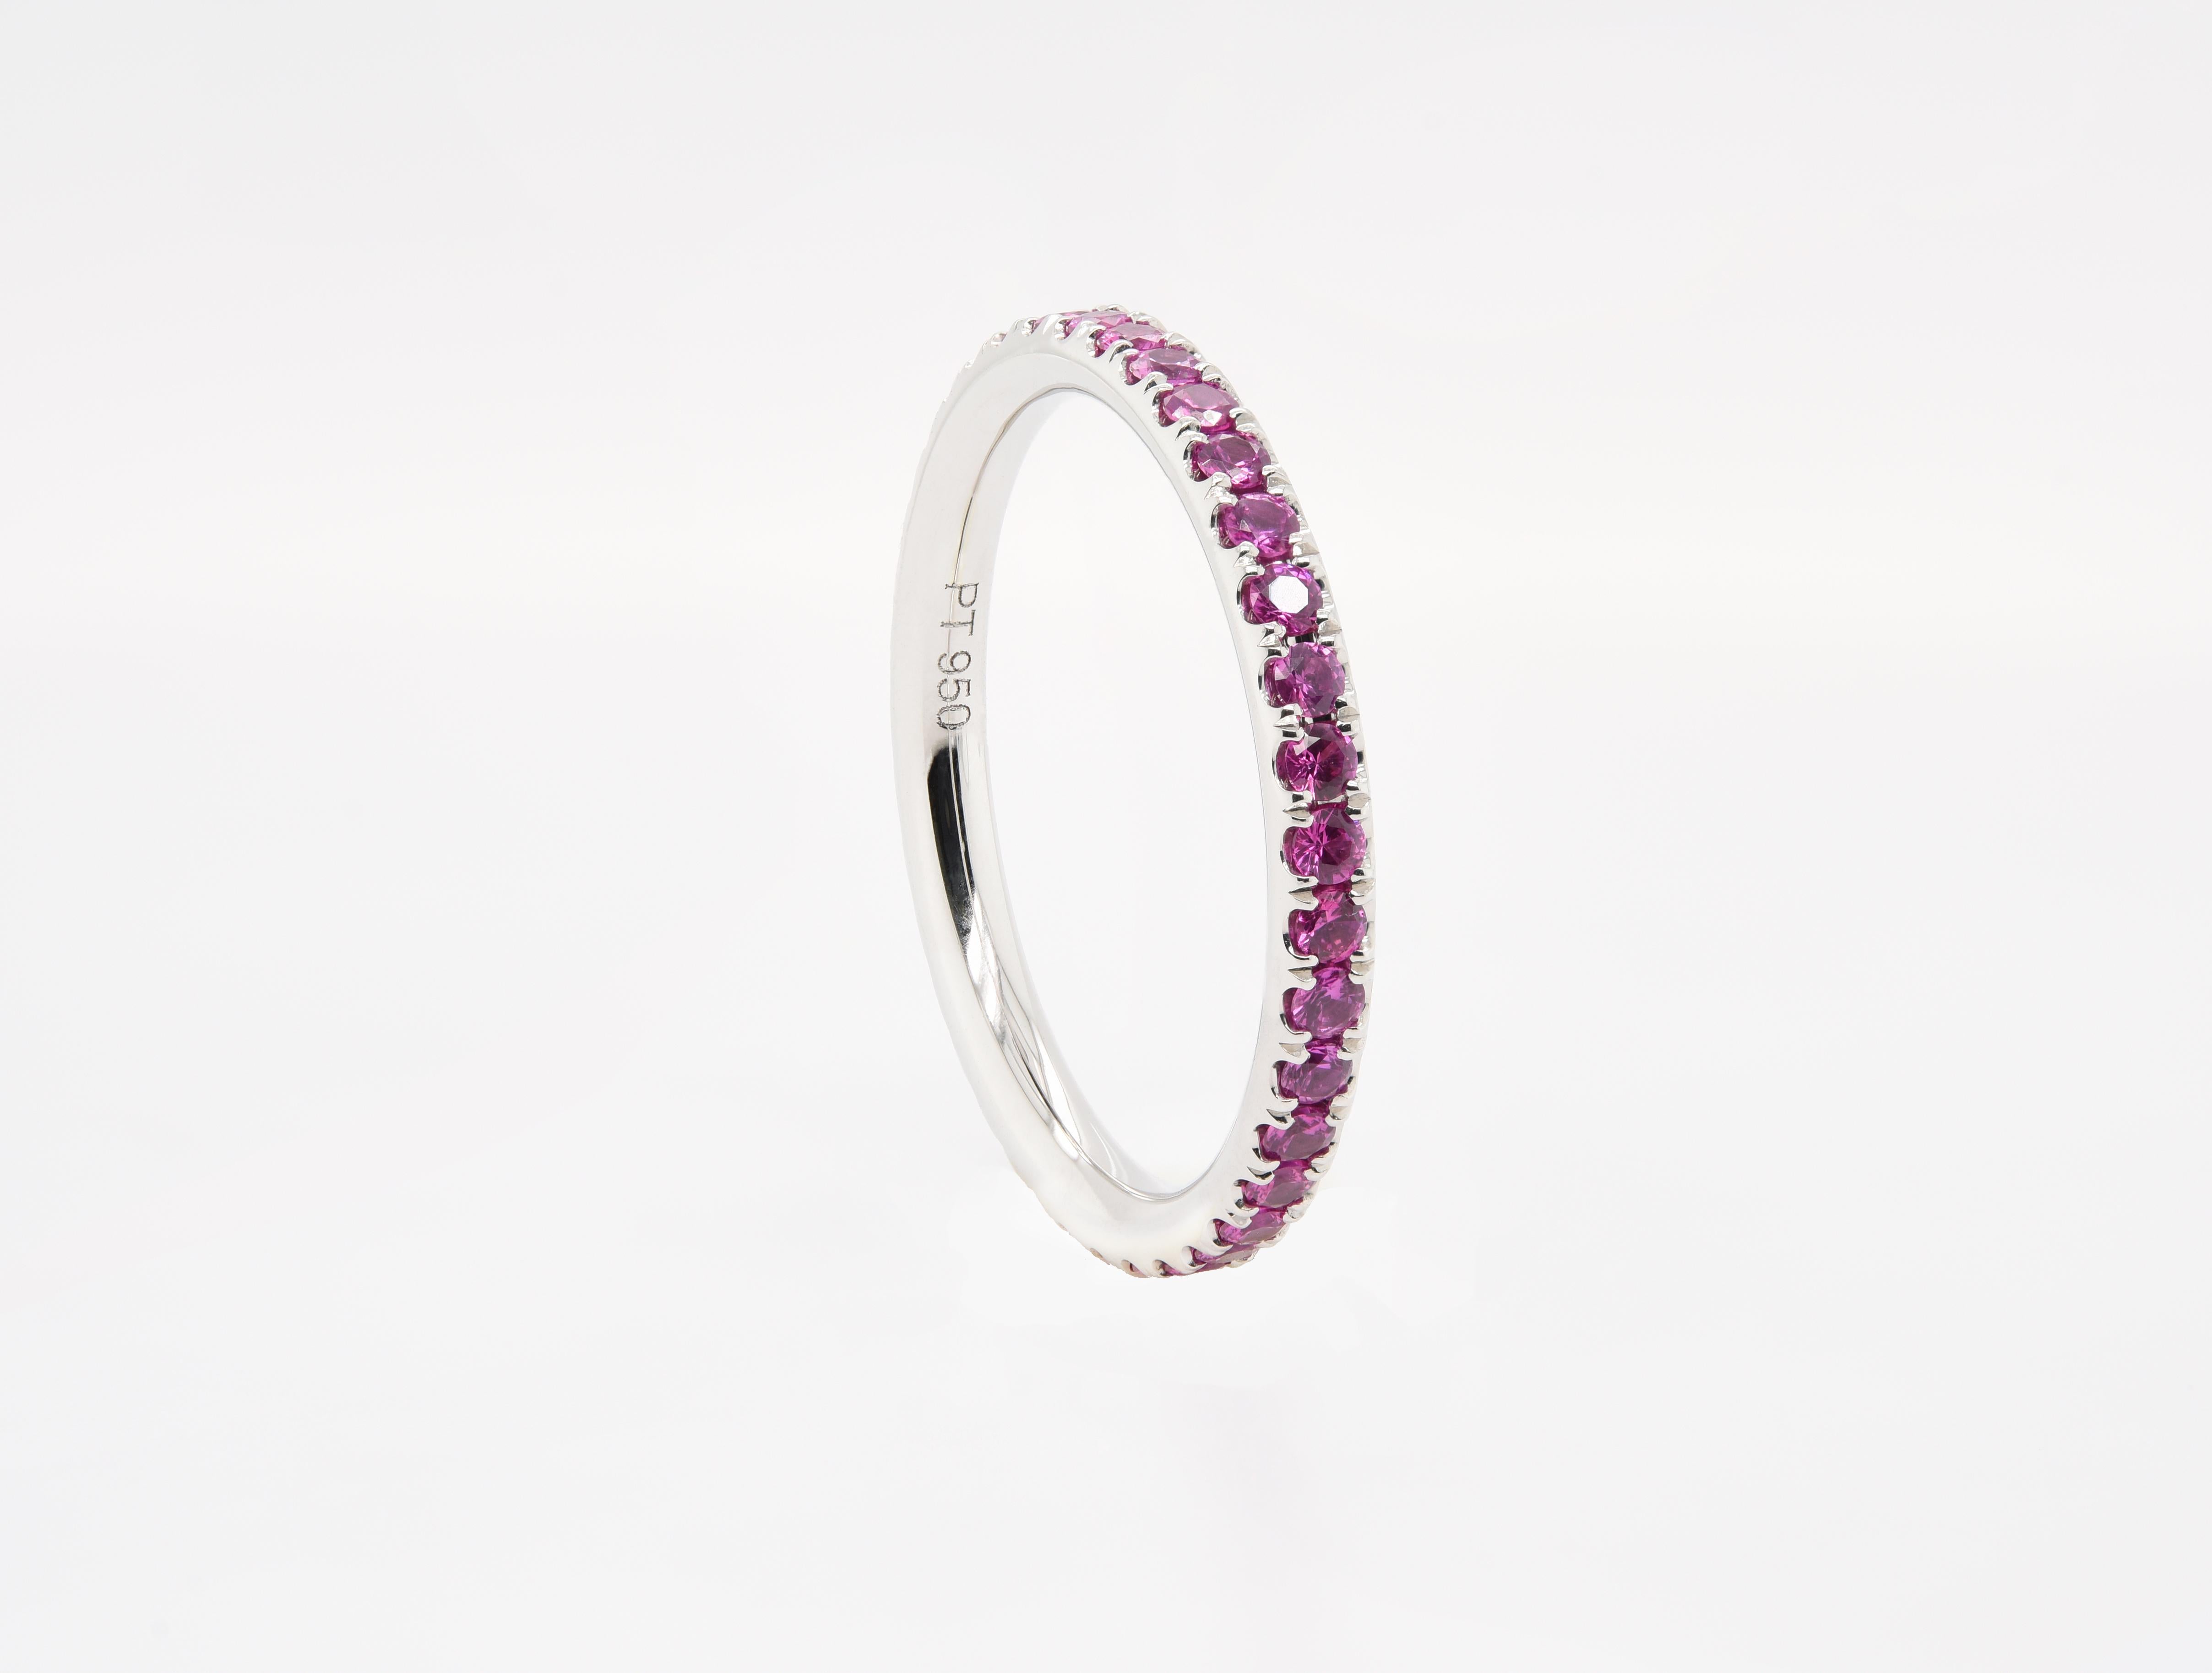 JAG New York Eternity Band with Your Choice of Diamonds and Gemstones For Sale 7